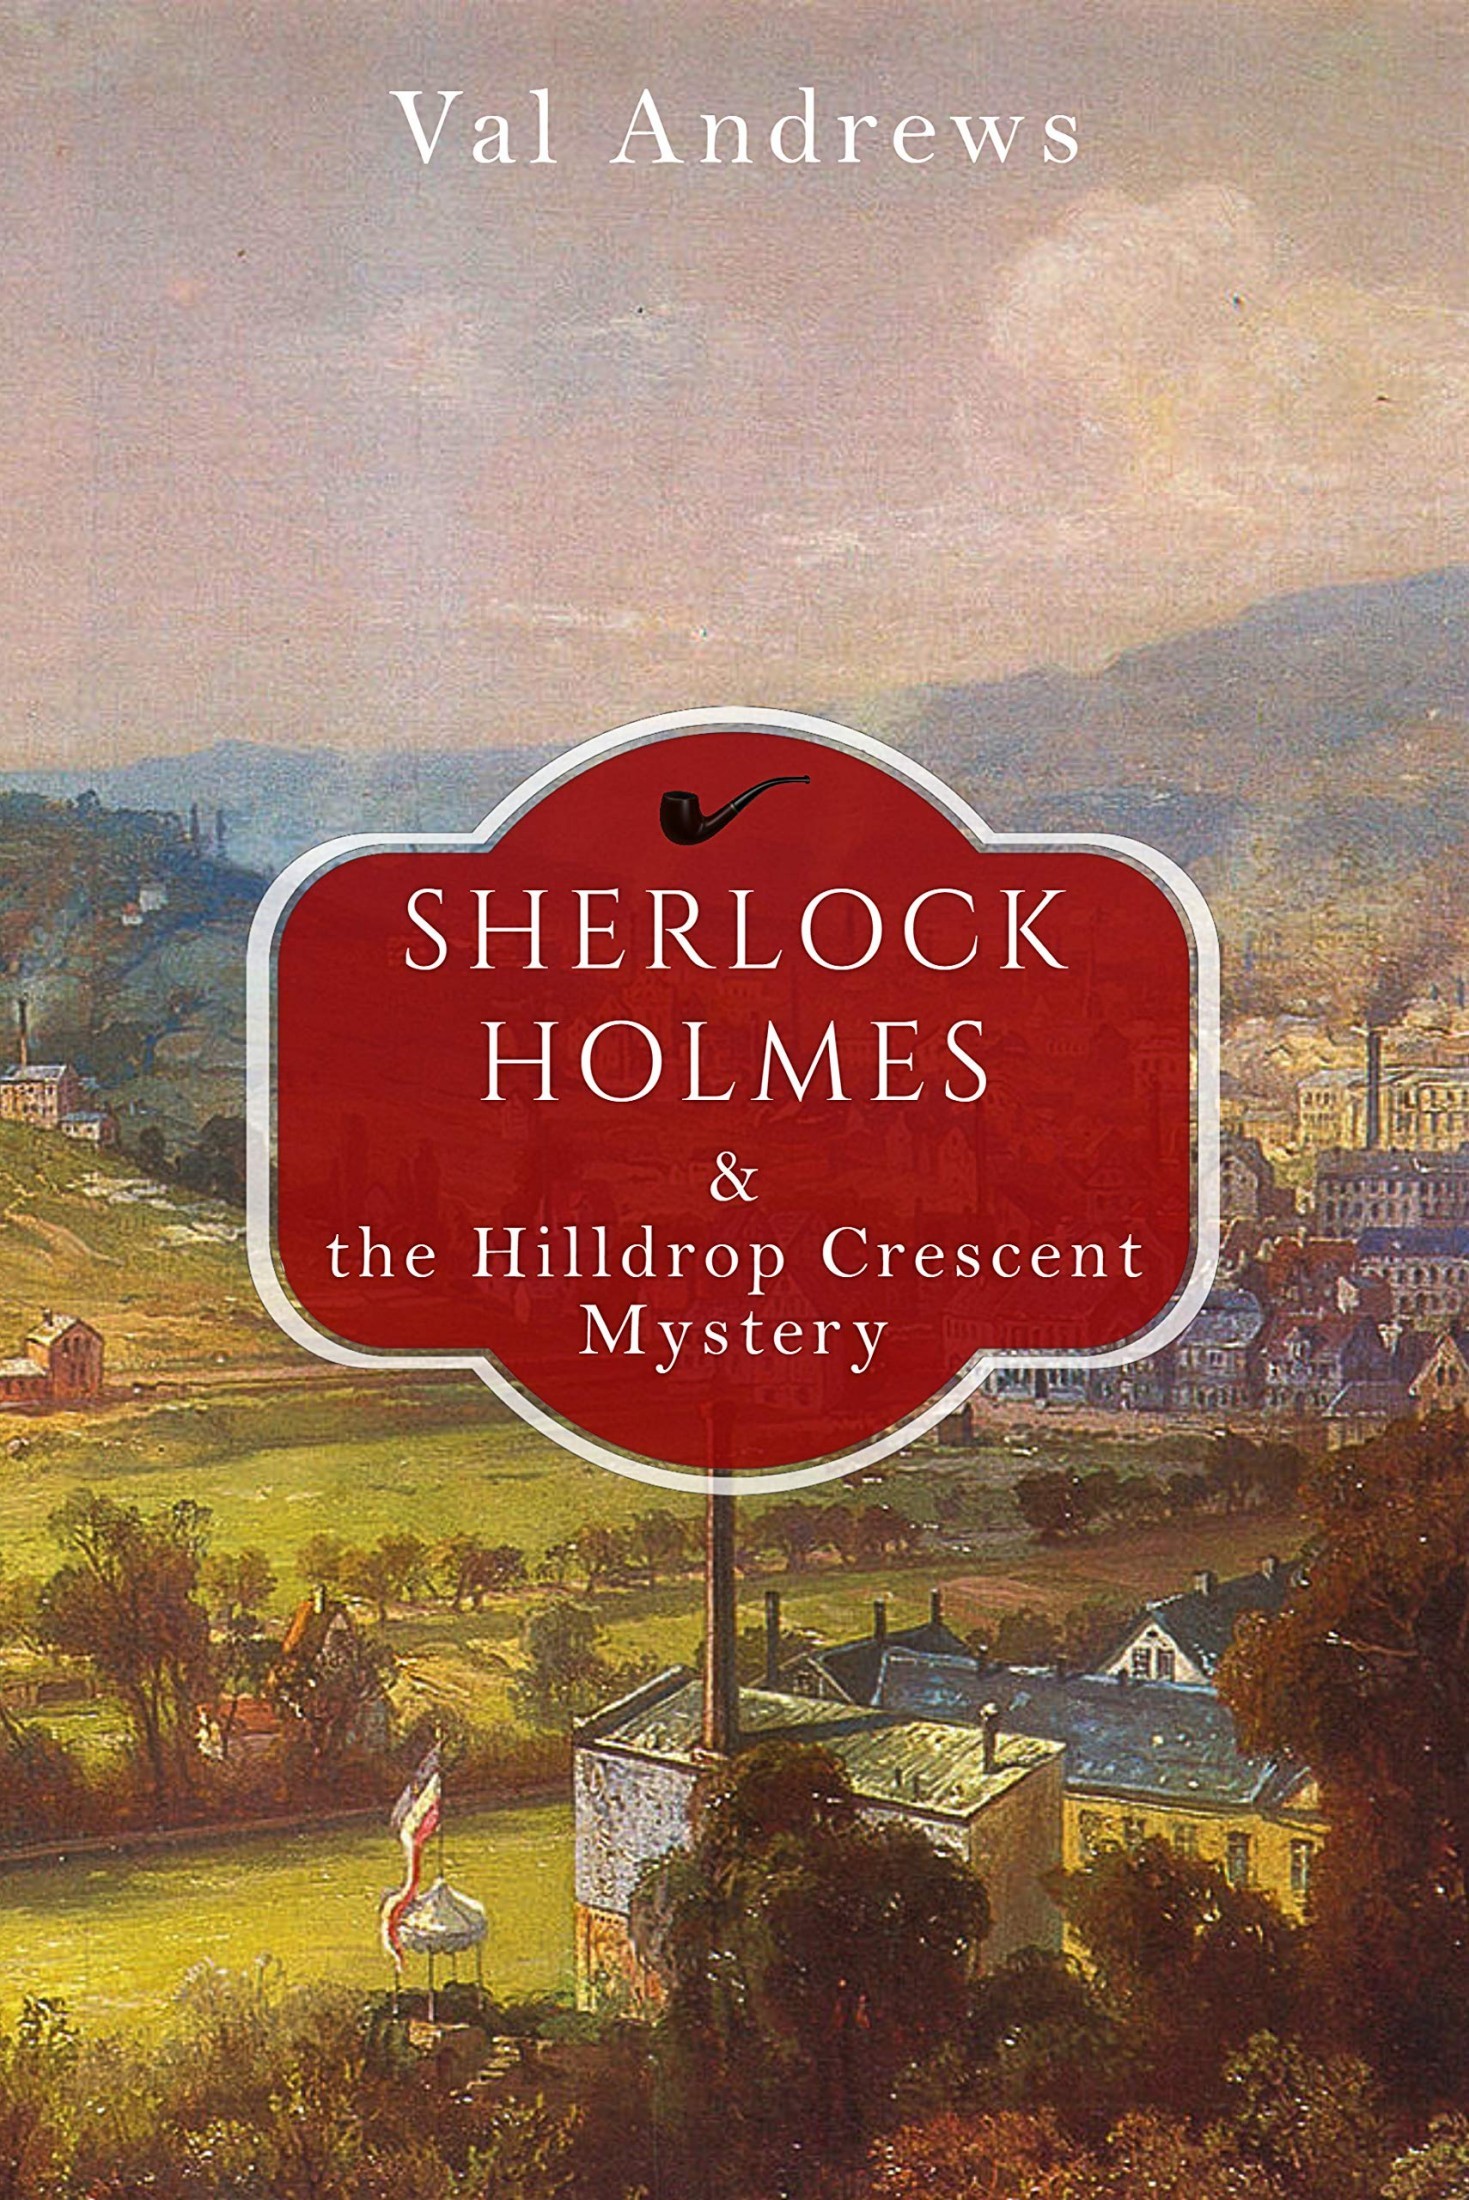 Sherlock Holmes and the Hilldrop Crescent Mystery